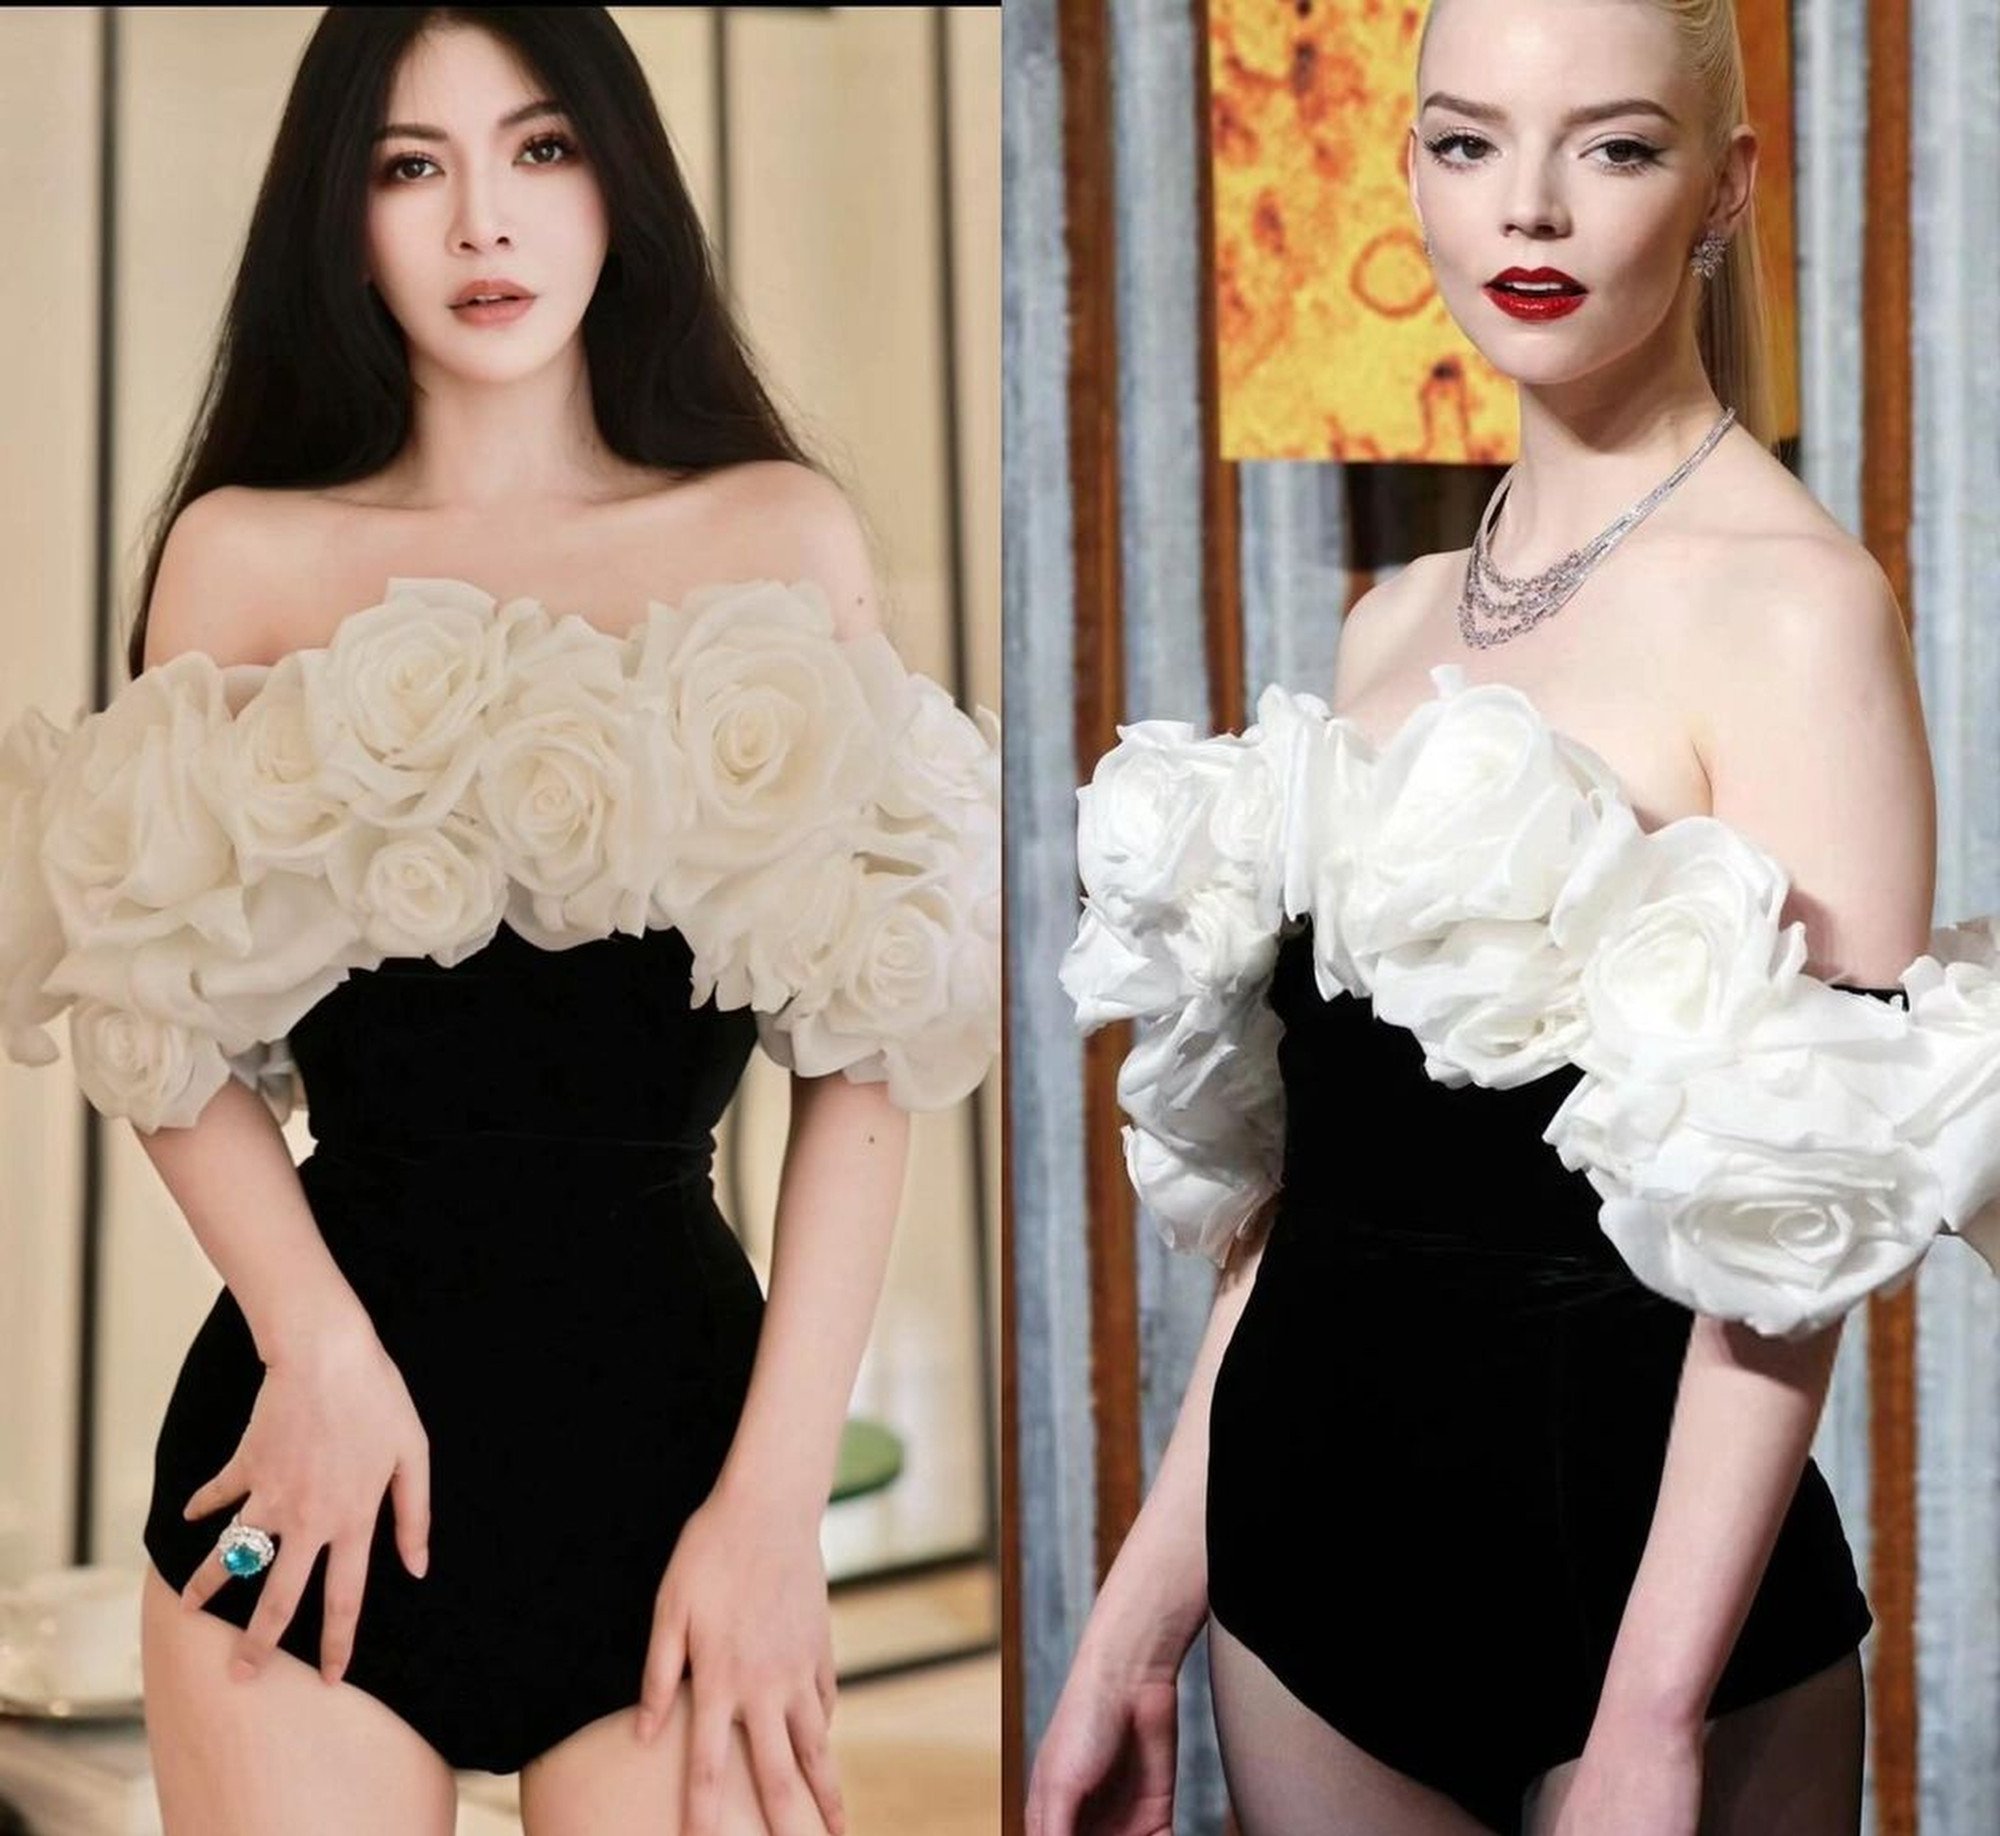 ‘who Is Haute Couture Queen?’: China Kol Lulu With Million Fans Slams 